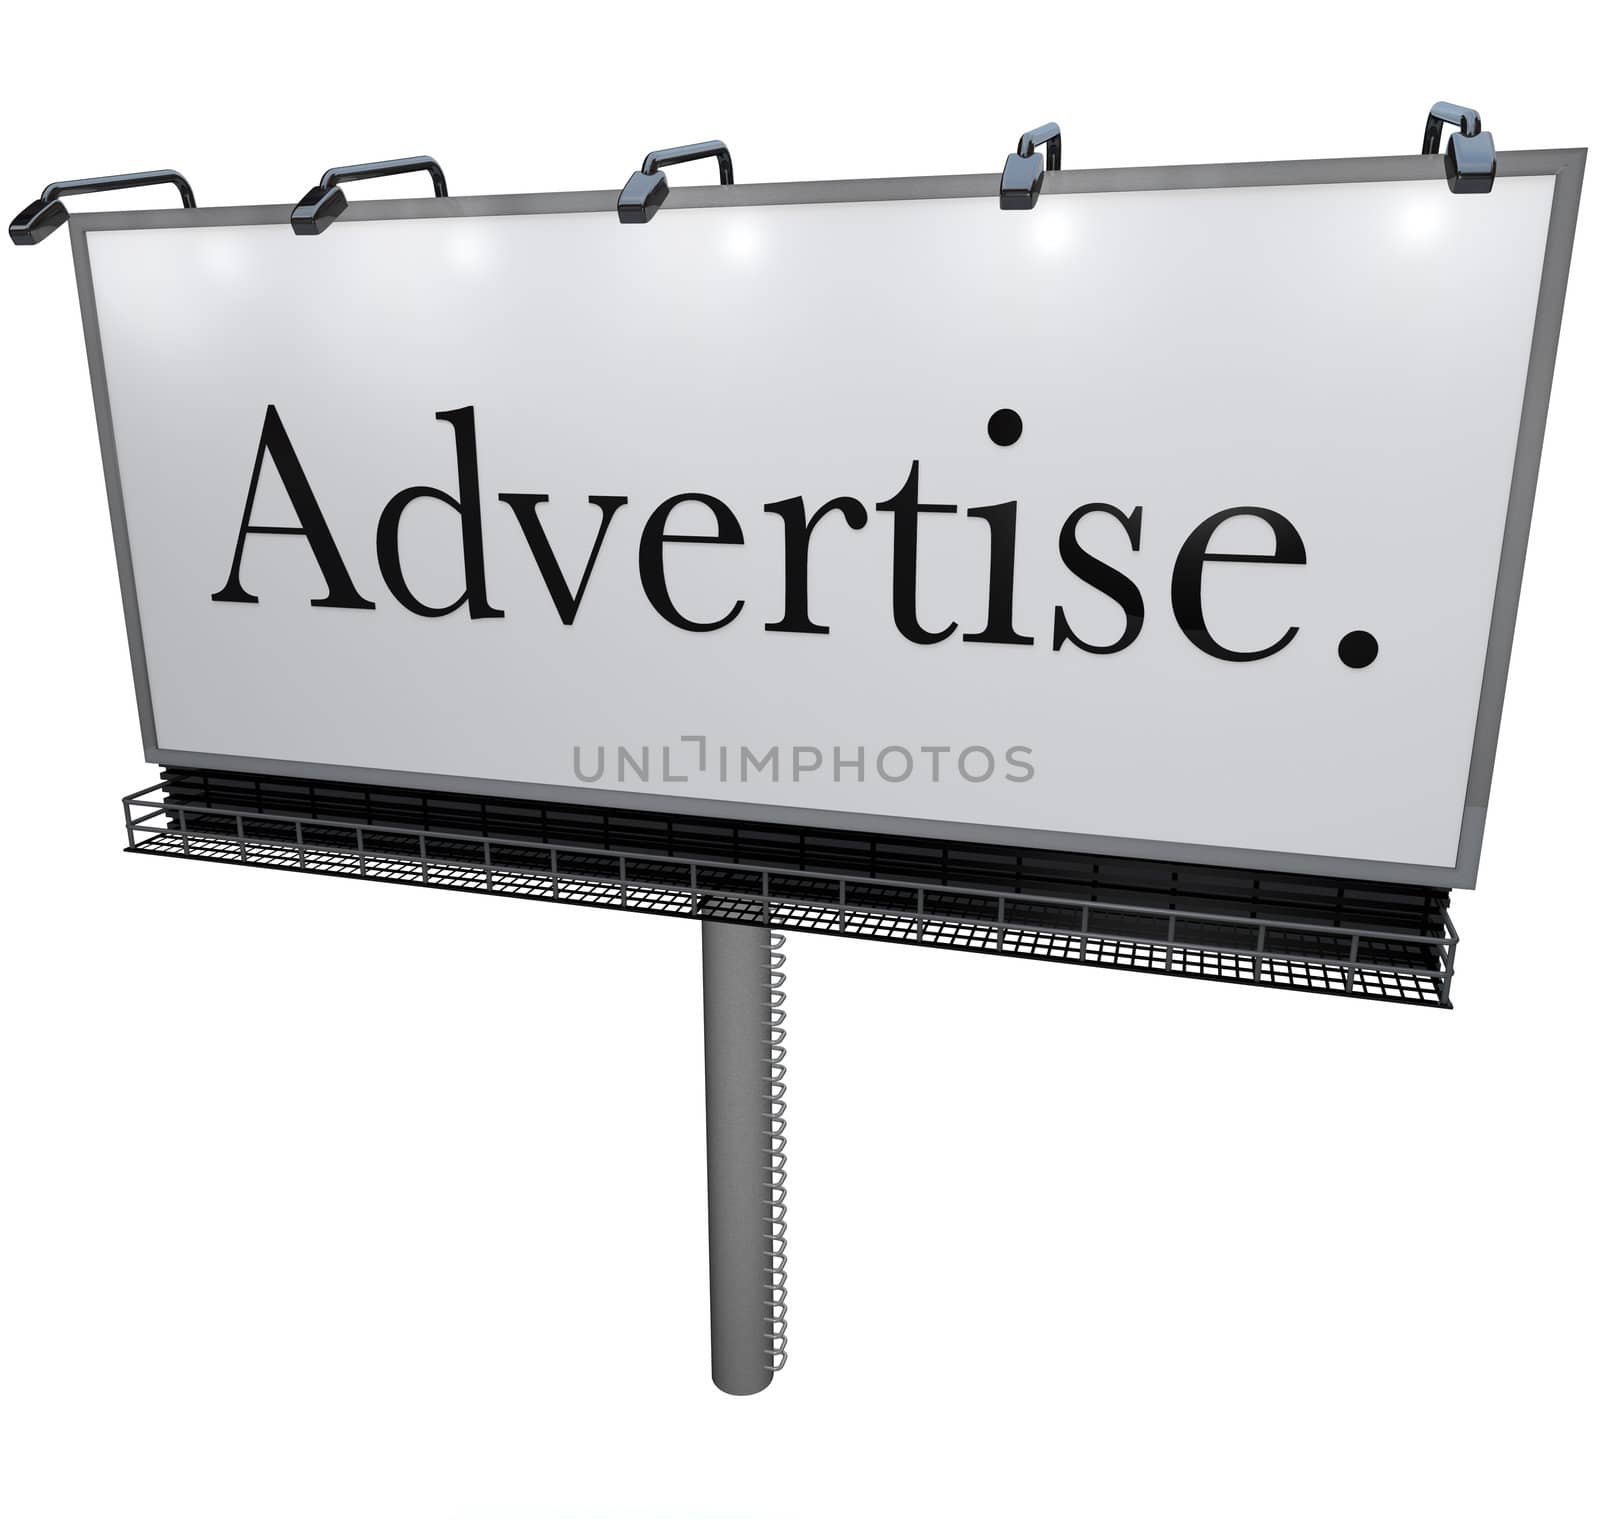 Outdoor Billboard Advertise Word Attract Customers by iQoncept